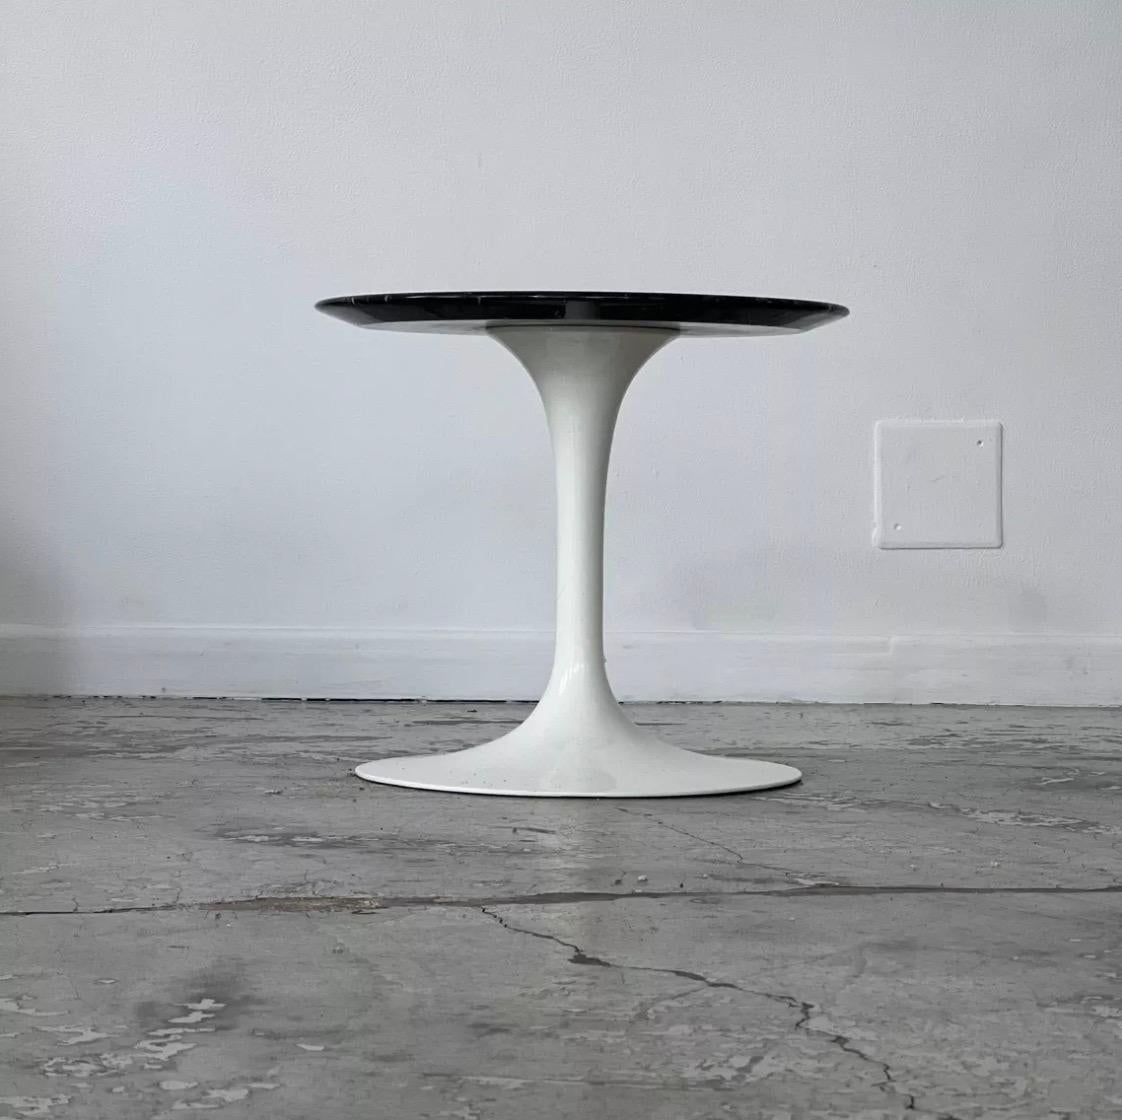 This side table was designed by Eero Saarinen for Knoll International in the 1960s. Knoll commissioned Eero Saarinen in 1947, marking the beginning of a long collaboration between the architect and designer. The organic base is in white lacquered